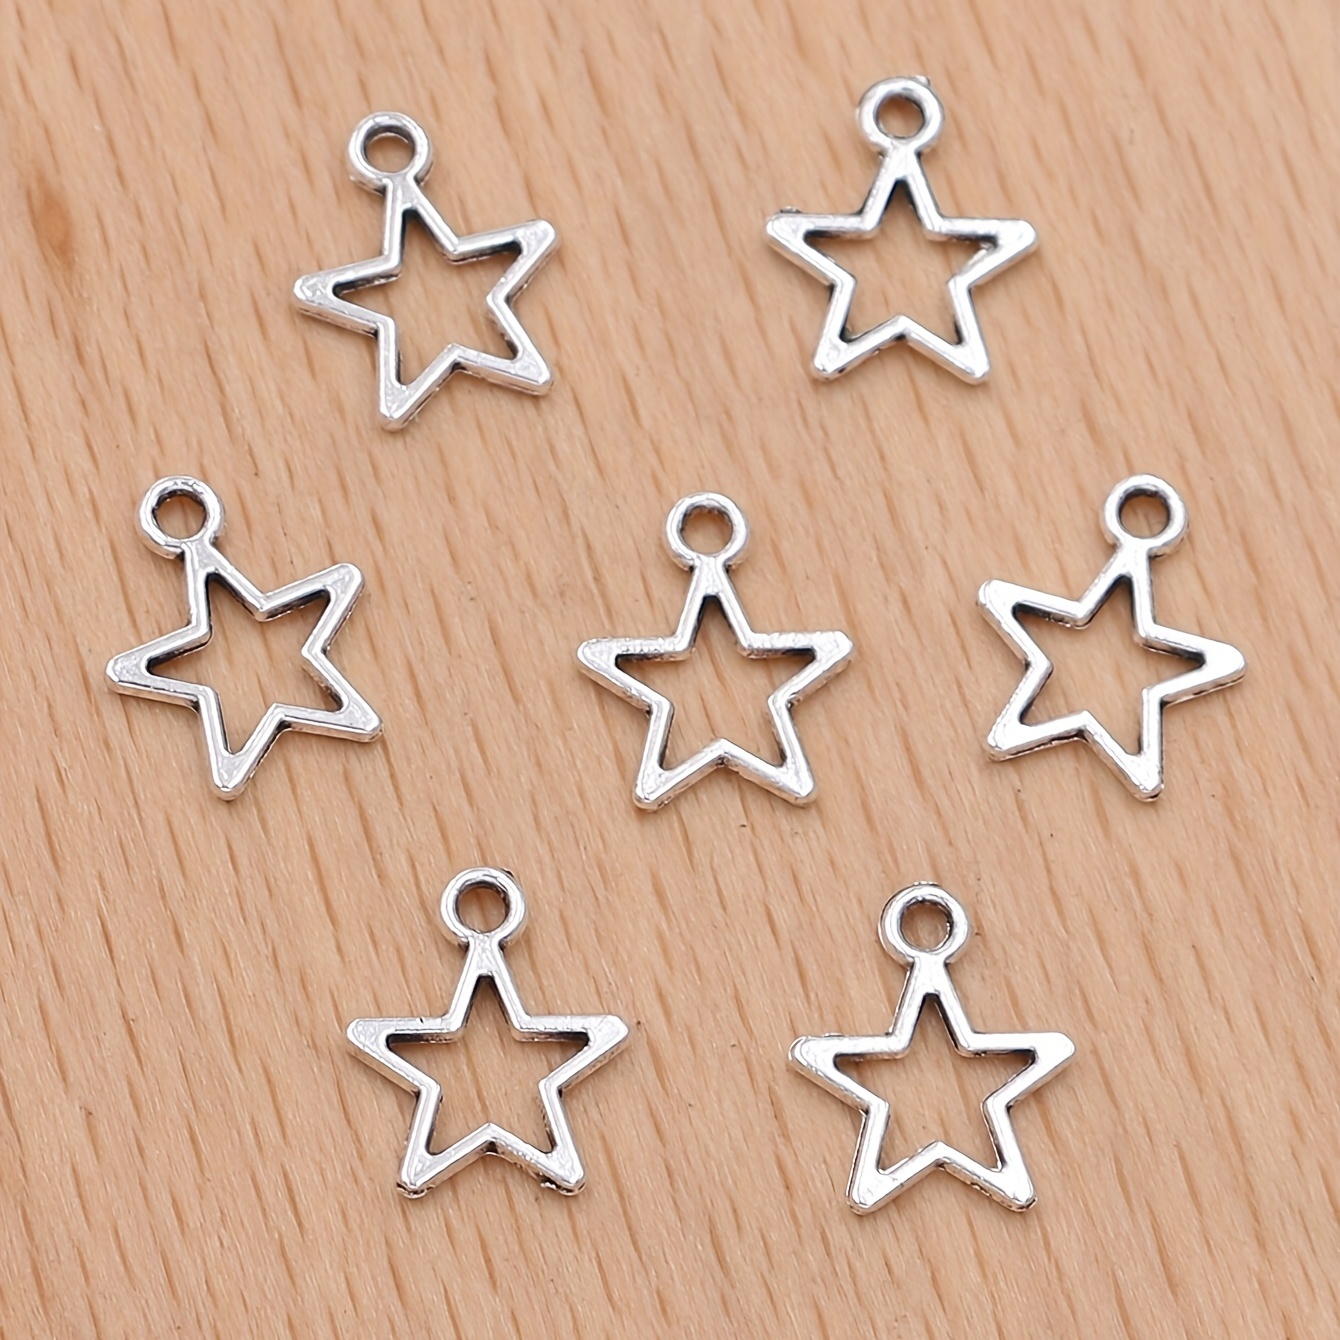 300 Antique Silver Star Star Charm For DIY Jewelry Making 15 12mm